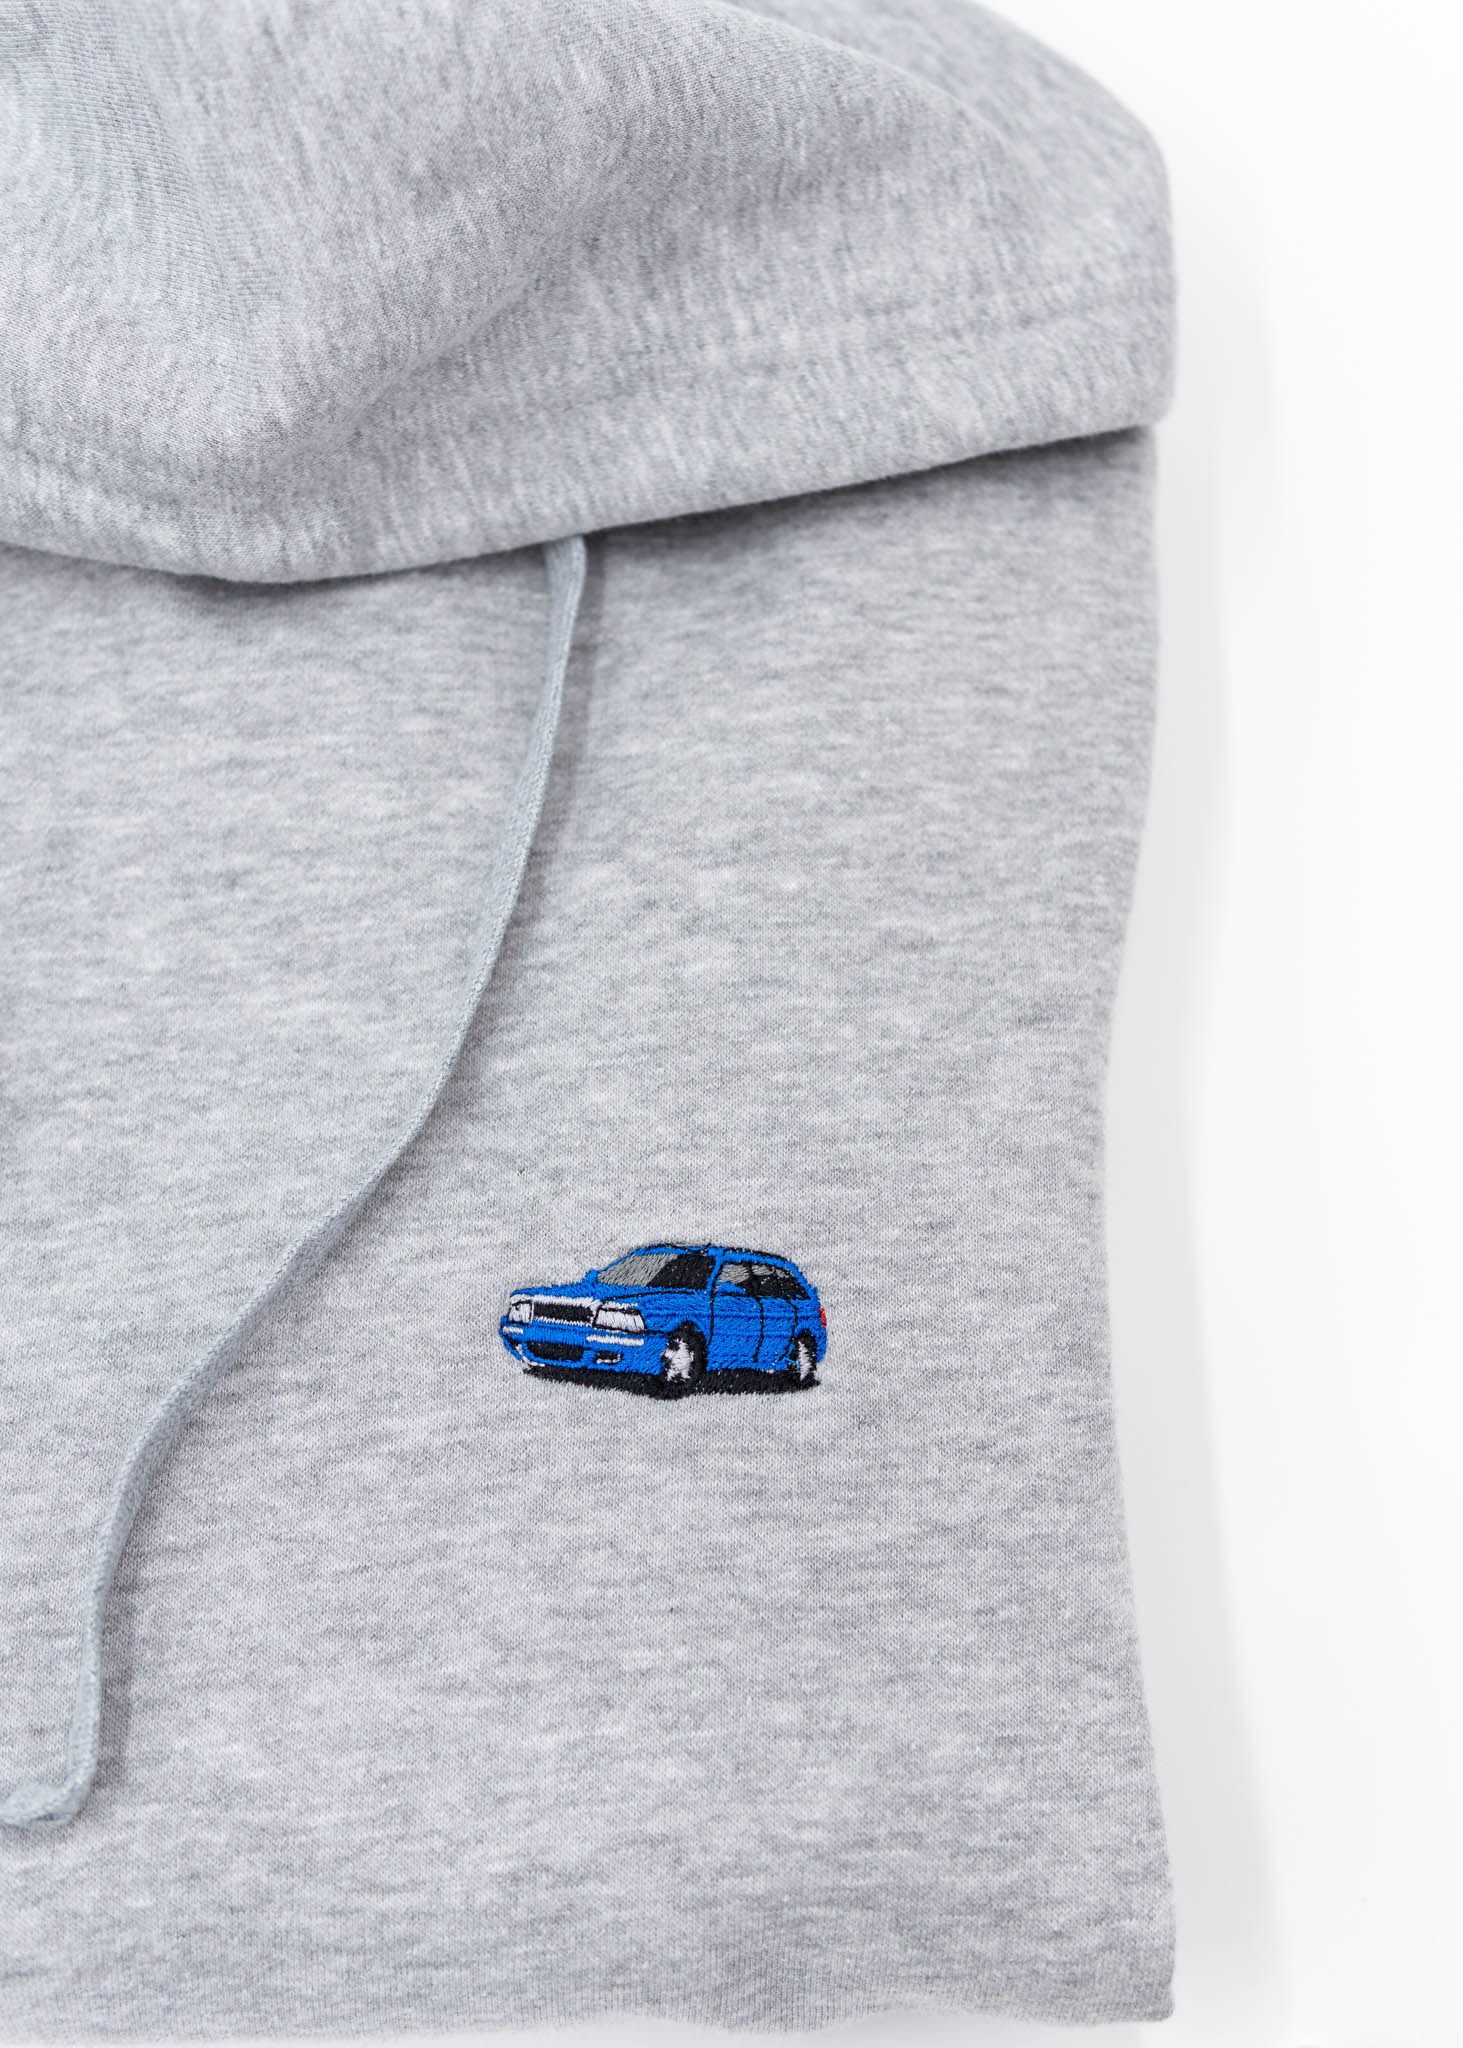 A grey Audi unisex hoodie for men and women. Photo is a close up view of the sweater with an embroidered Nogaro Blue Audi 80 RS2 Avant made by Porsche. Fabric composition is cotton, polyester, and rayon. The material is very soft, stretchy, and non-transparent. The style of this hoodie is long sleeve, crewneck with a hood, hooded, with embroidery on the left chest.